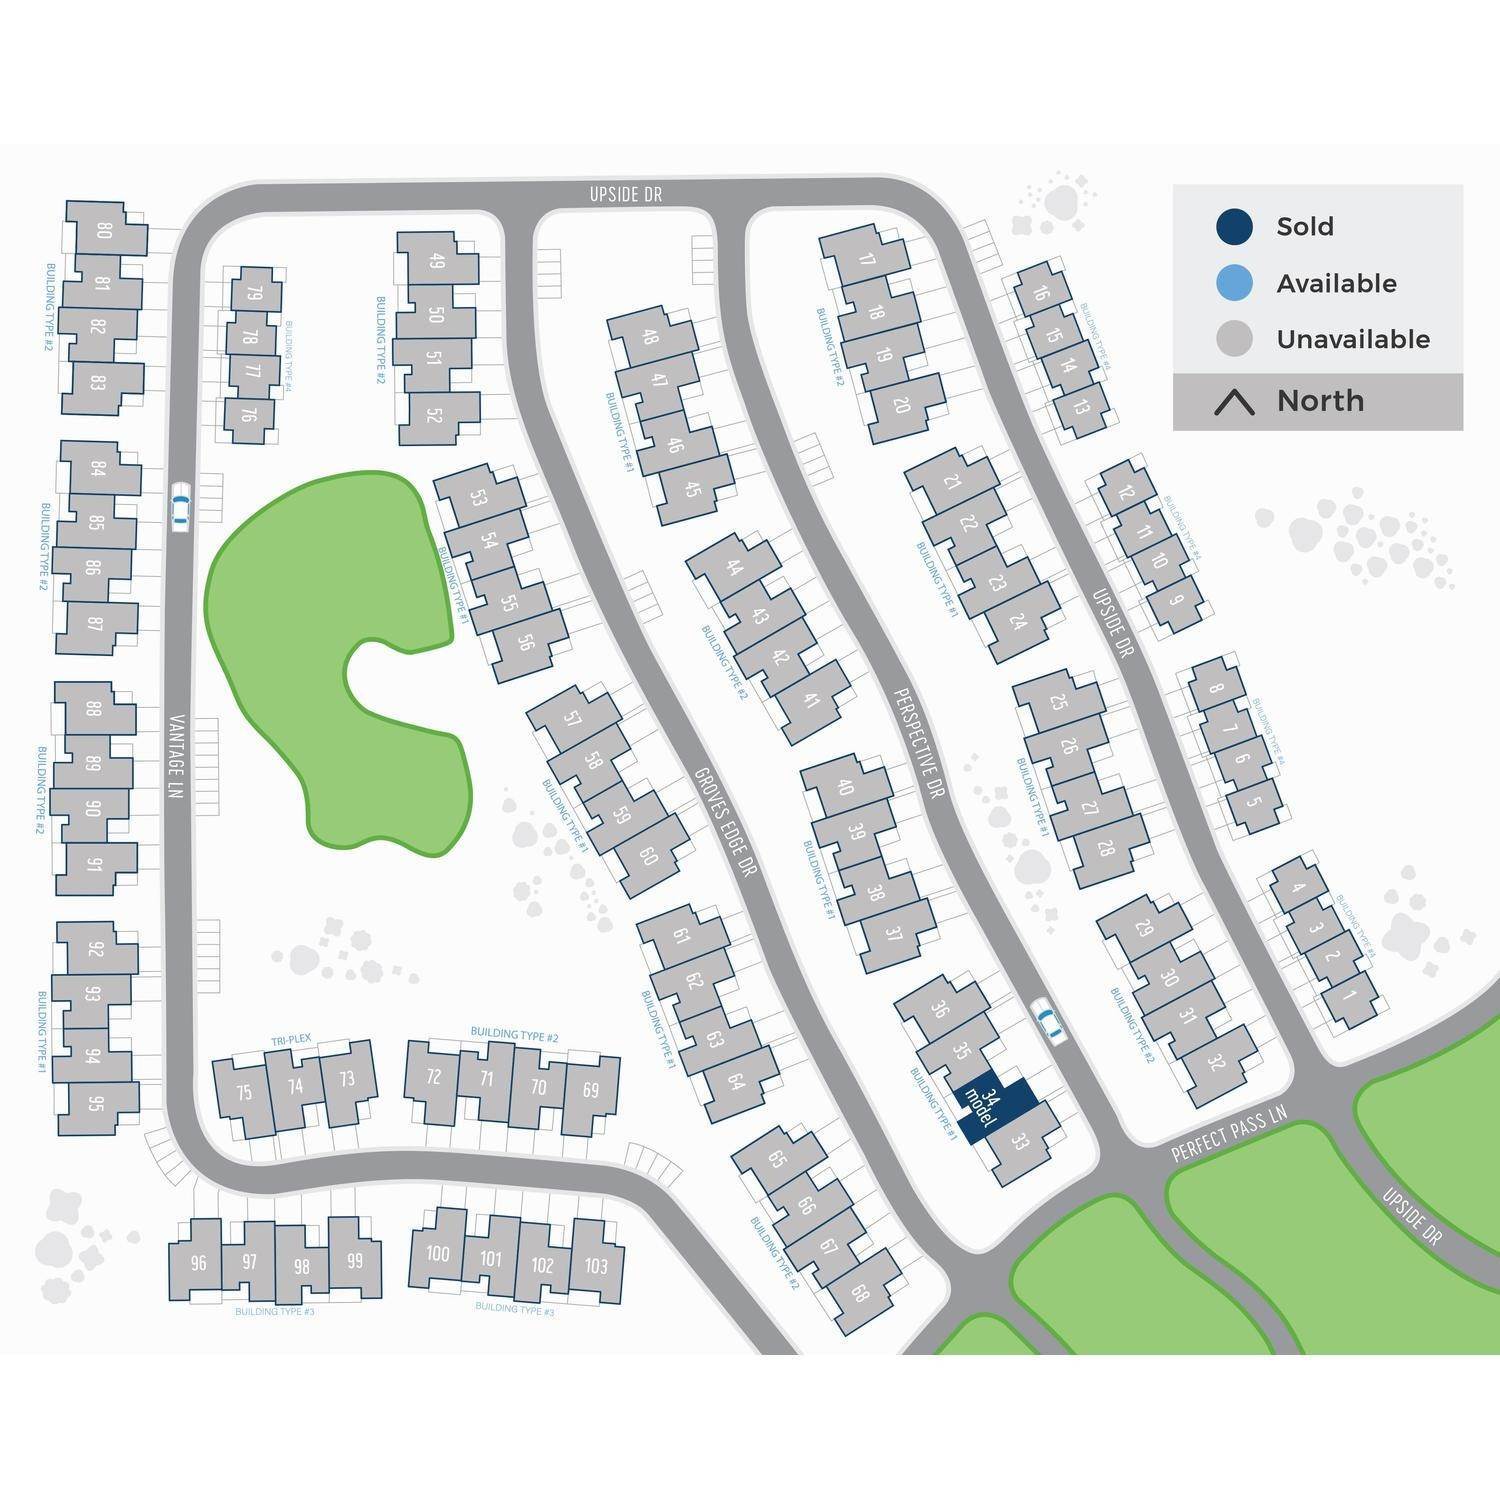 8. Shoreline Townhomes Gebäude bei 11449 N. Perspective Drive, Hideout Canyon, UT 84036